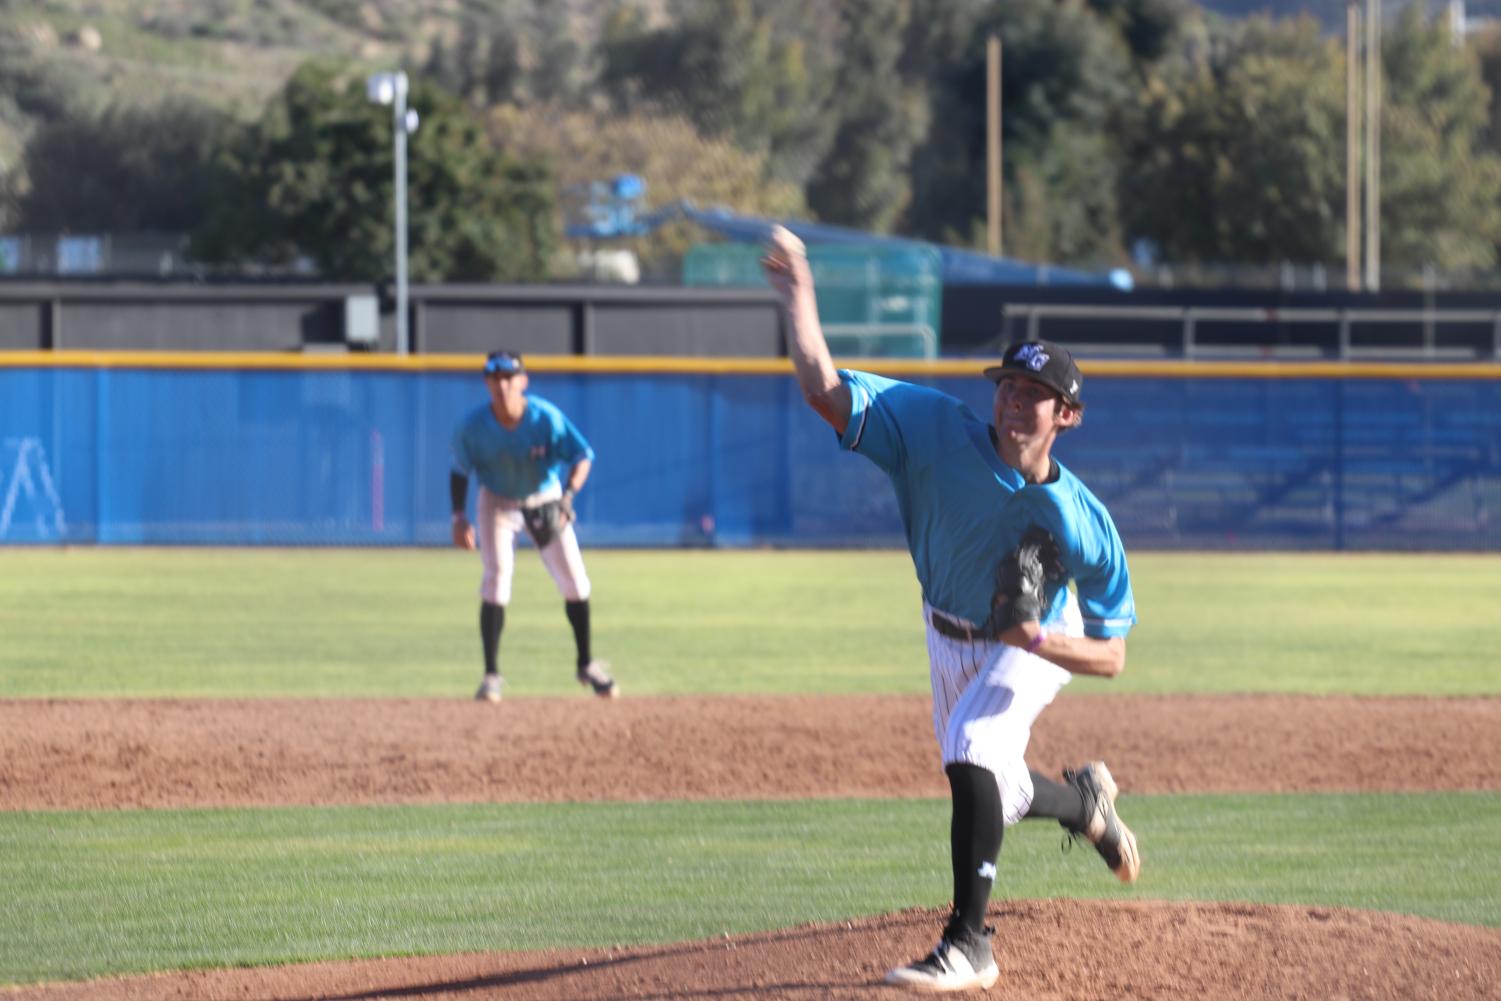 Moorpark pitcher Brendan Klugman throwing a pitch against East Los Angeles College on Feb. 8, 2022 in Moorpark, CA. Photo credit: Jack Newman